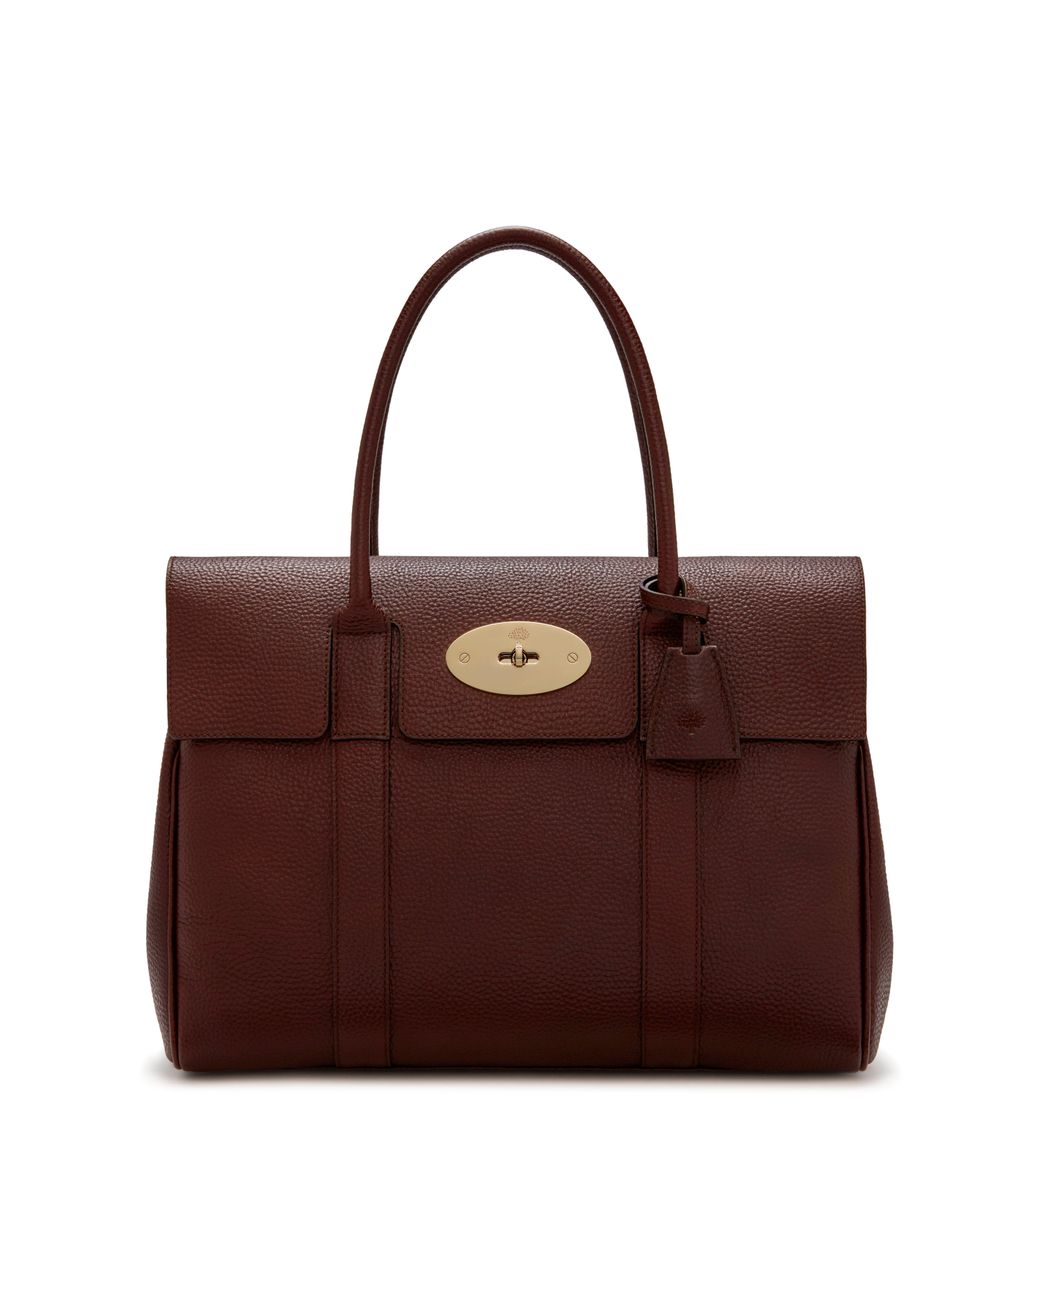 Mulberry Bayswater In Oxblood Natural Grain Leather - Lyst